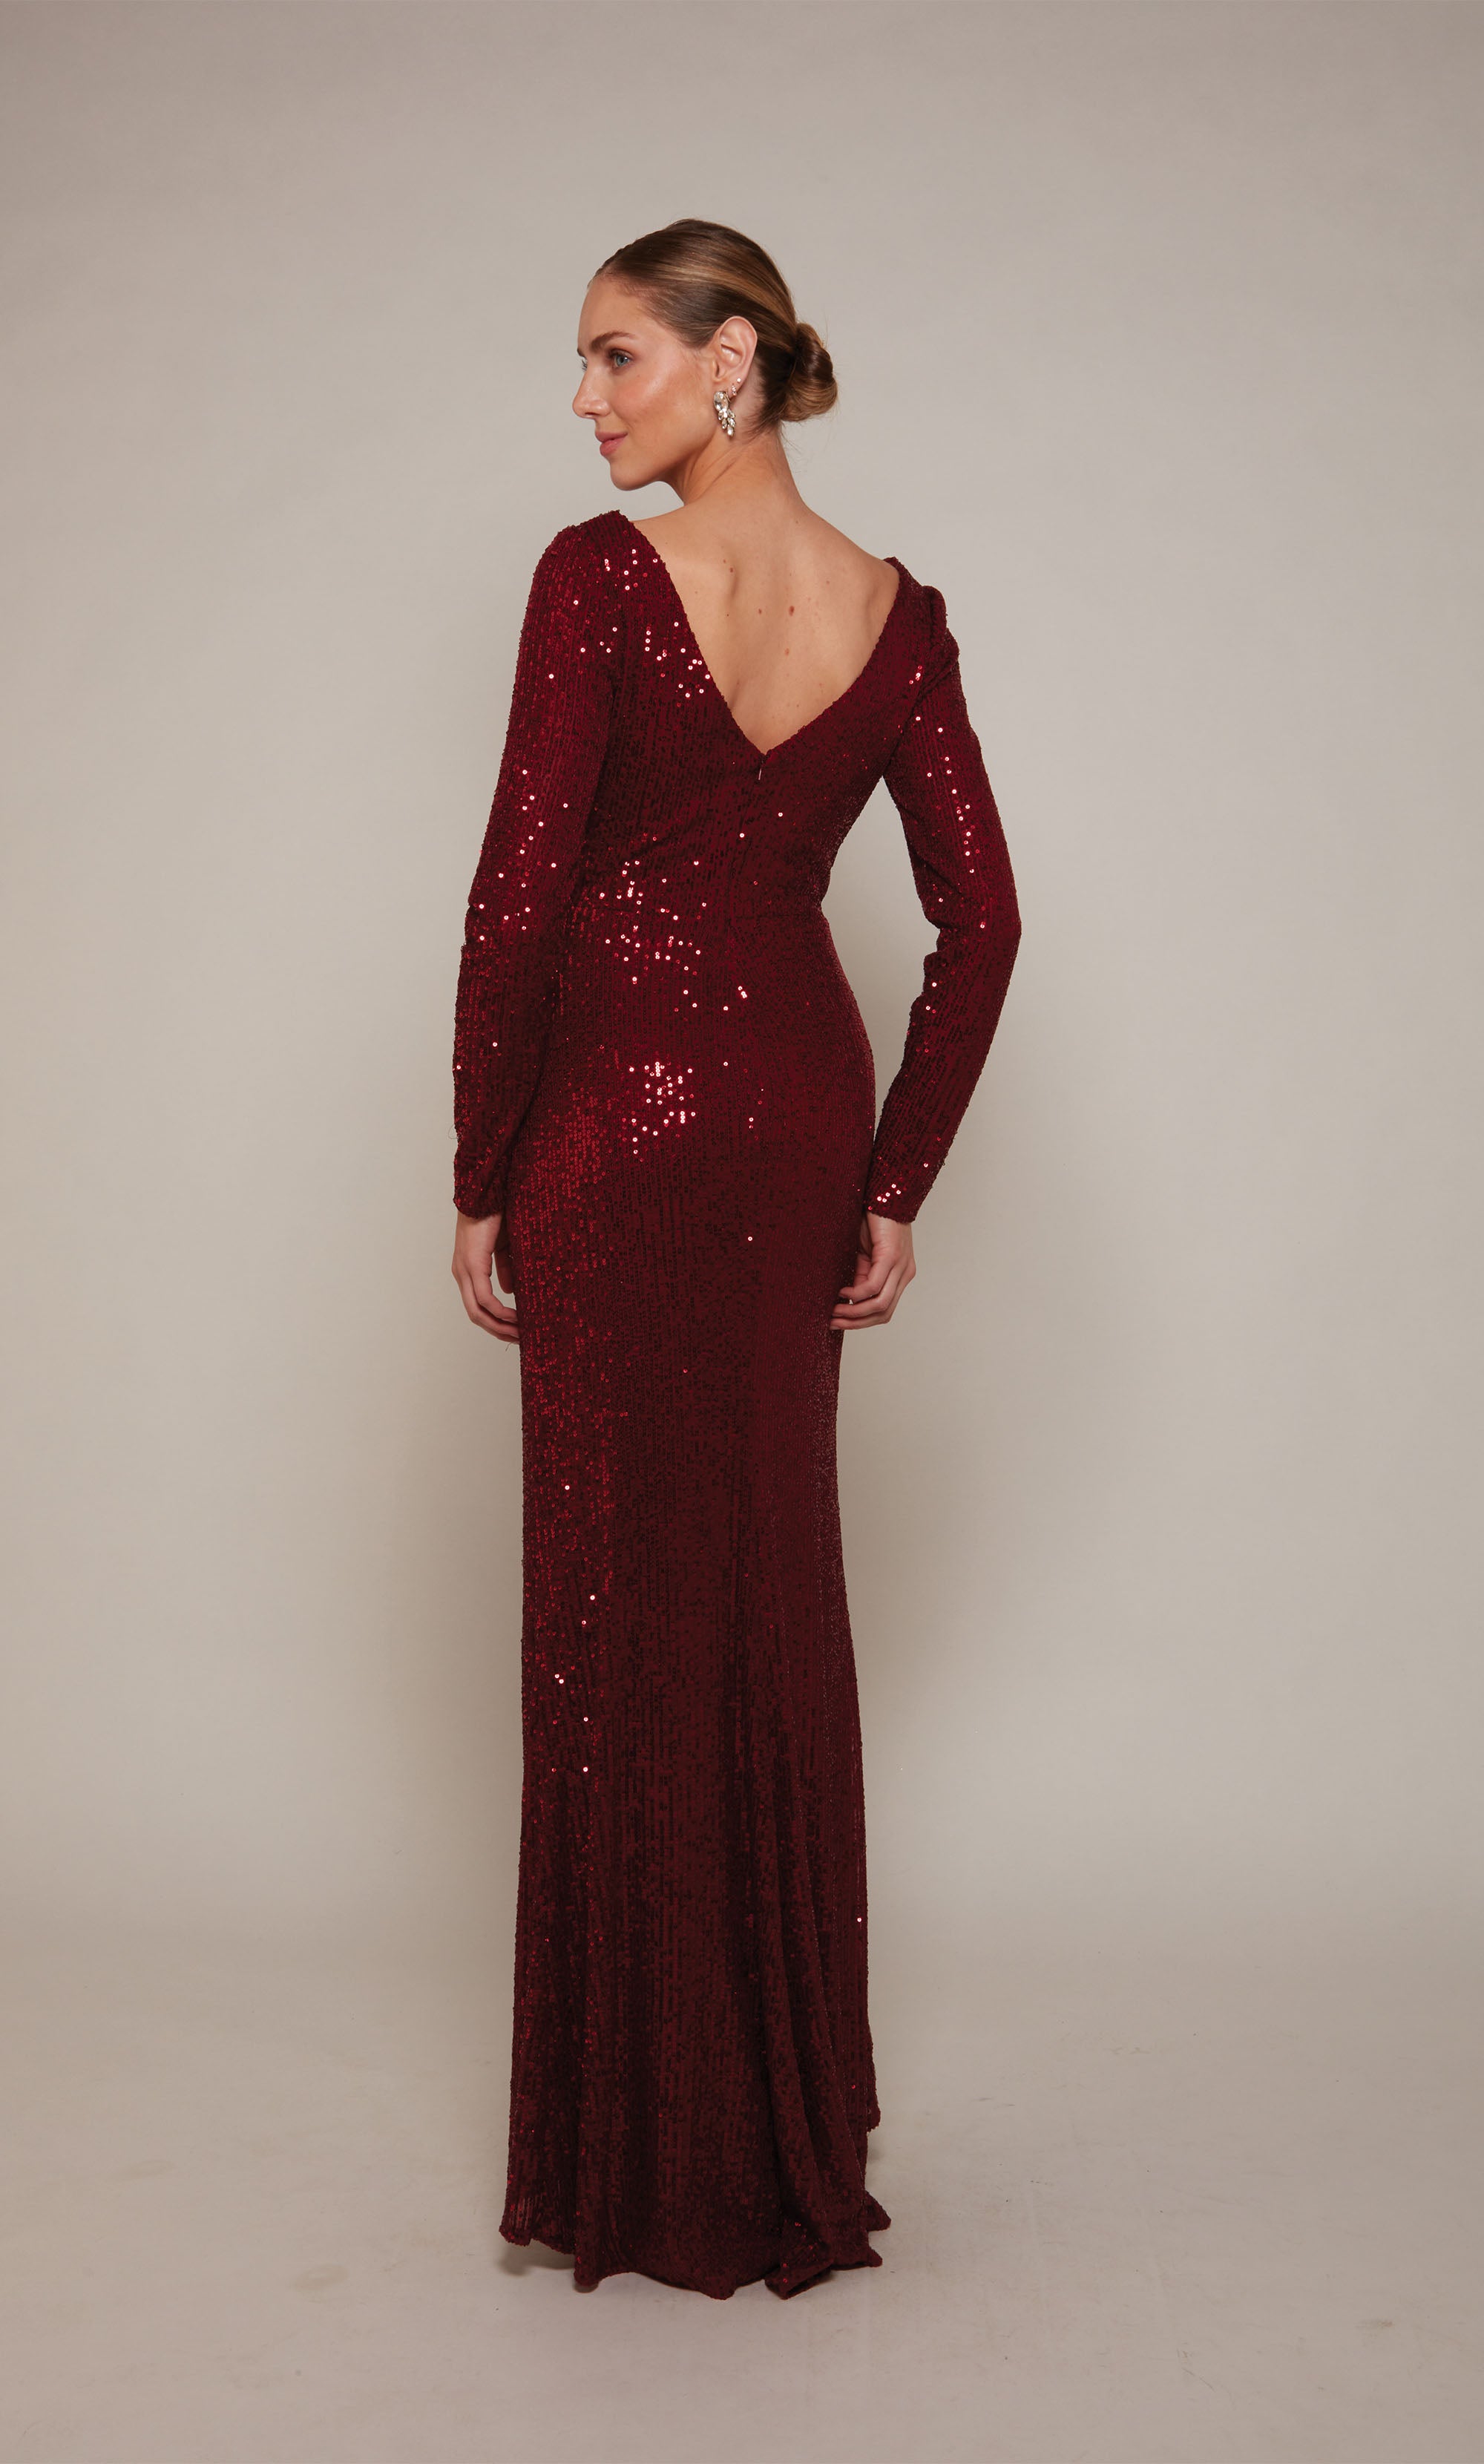 A long sleeve designer gown with a V-neckline, draped bodice, and side slit crafted from a rich wine colored sequin fabric.